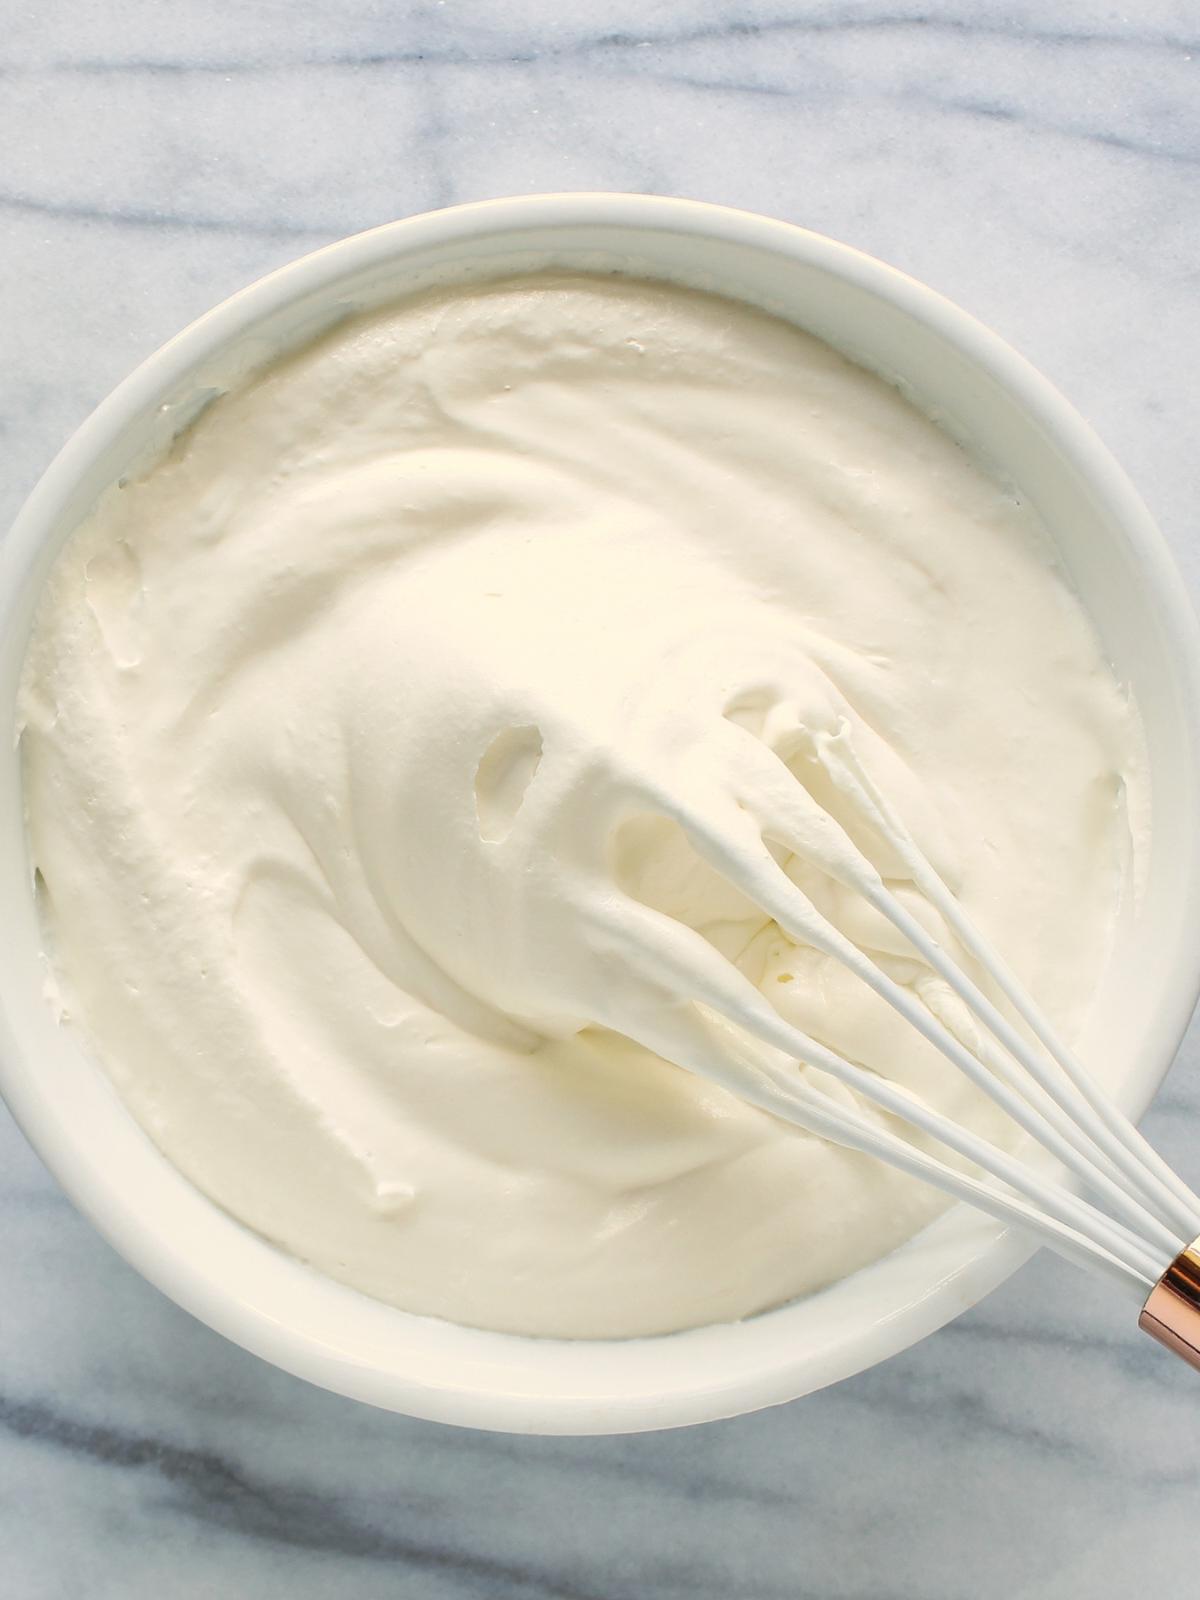 How to Make Whipped Cream Without Heavy Cream